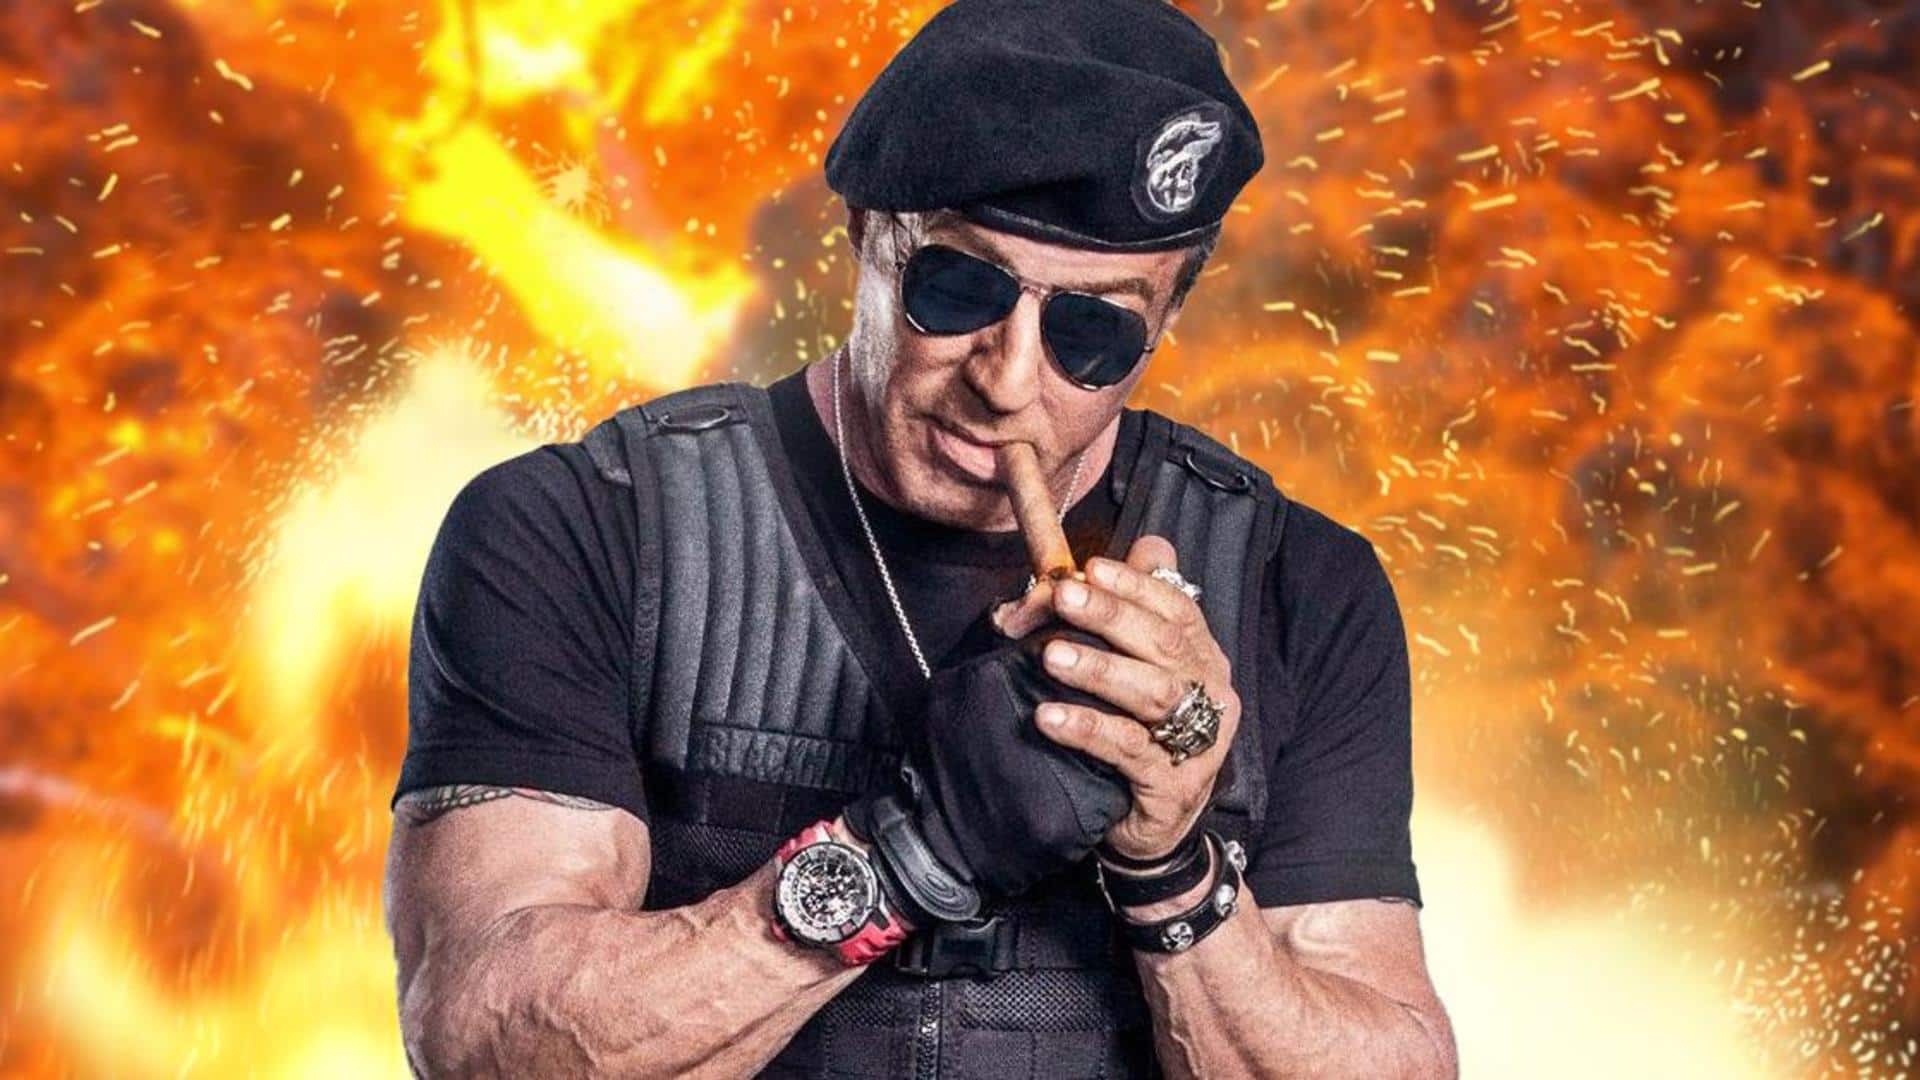 Sylvester Stallone-Megan Fox's 'The Expendables 4' trailer out 